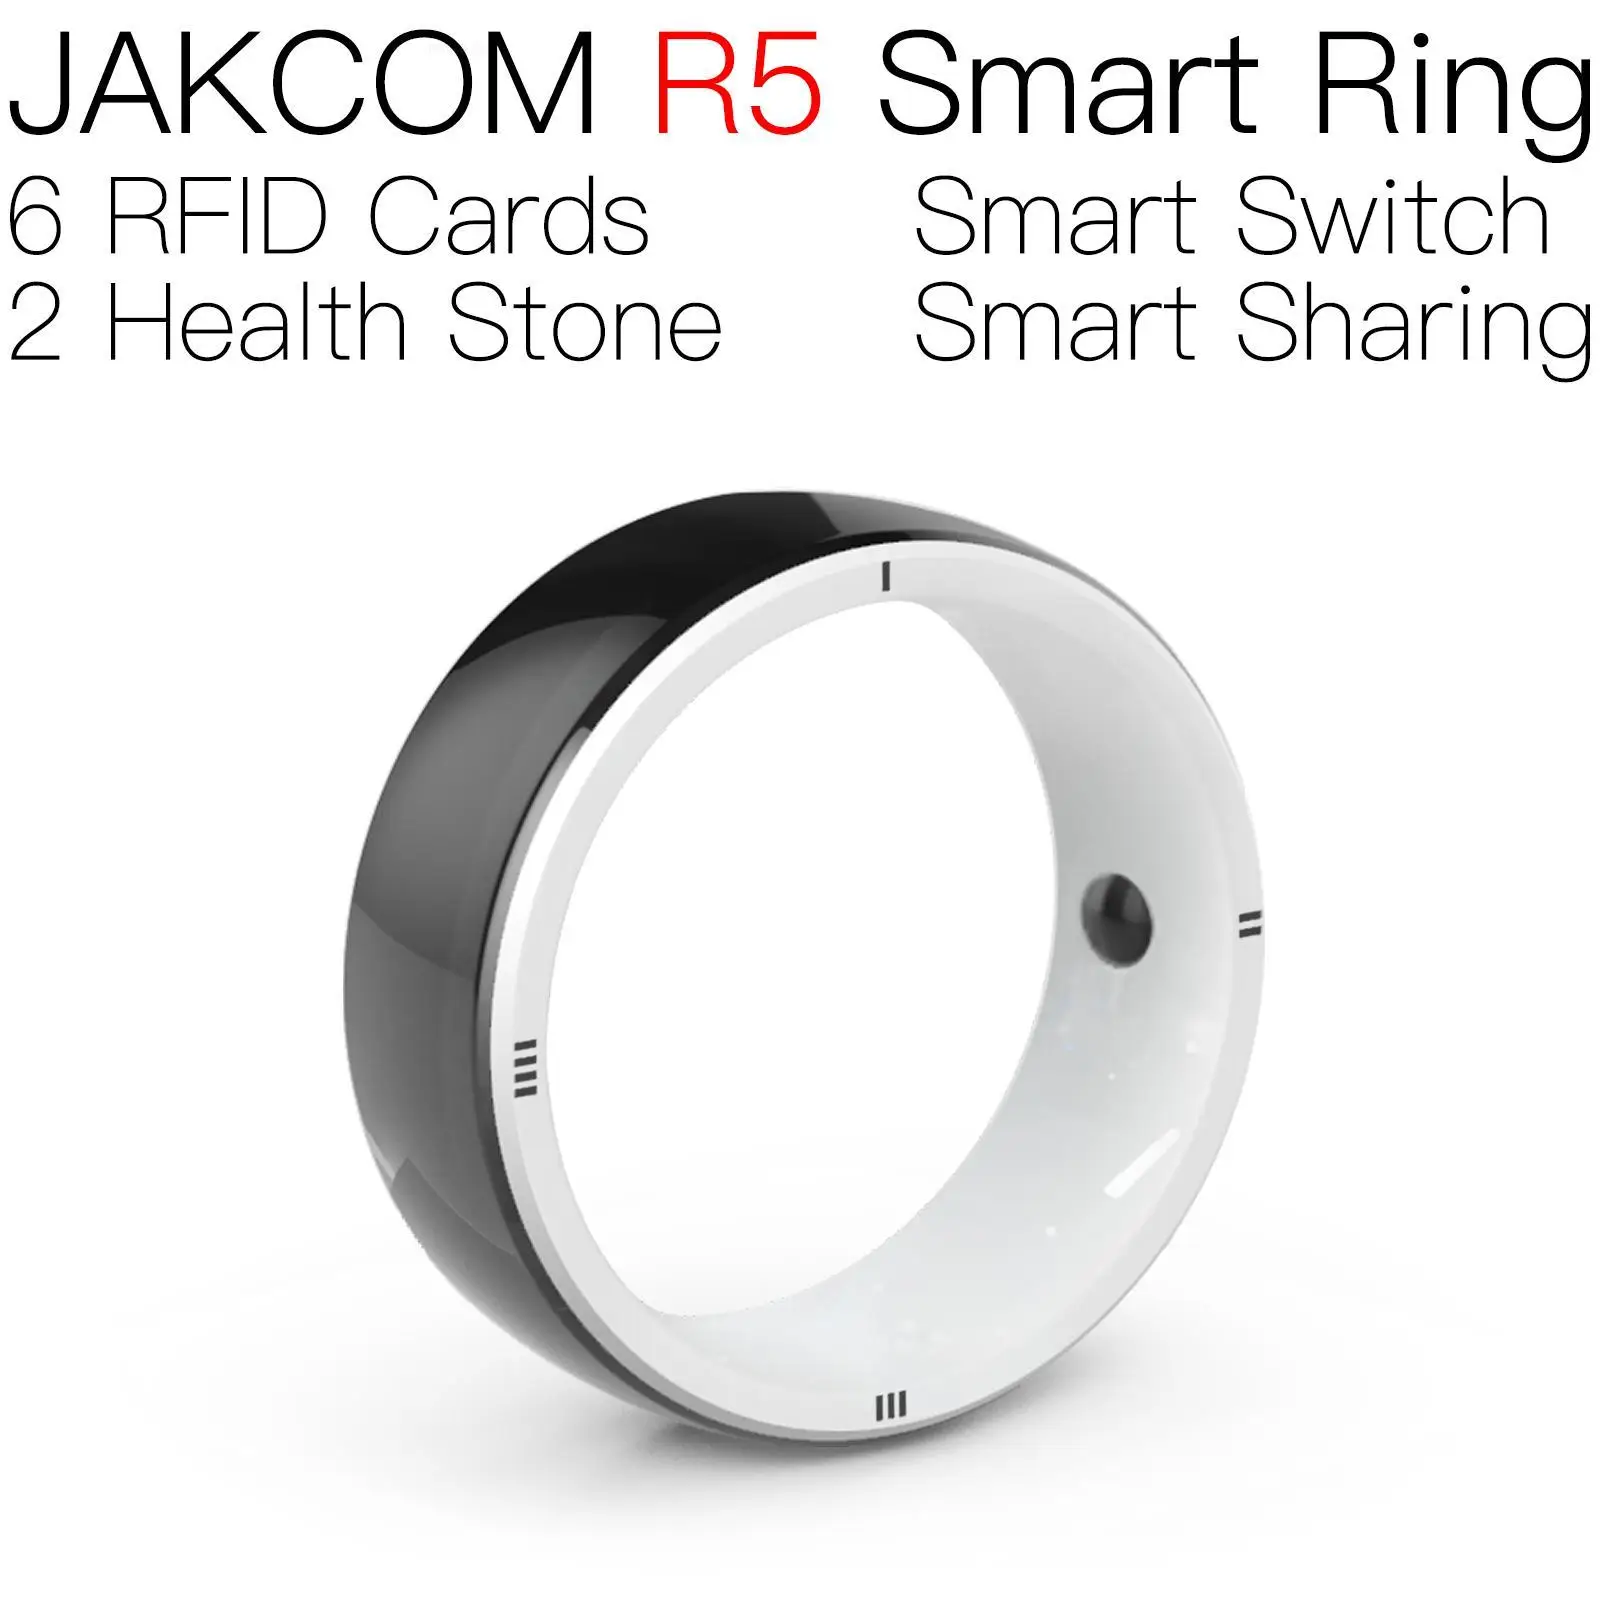 

JAKCOM R5 Smart Ring Newer than code2 chip nfc cell adaptor rfid az 9654 uhf 6c hbo max 1 year resetter pixma mg 2250 tag